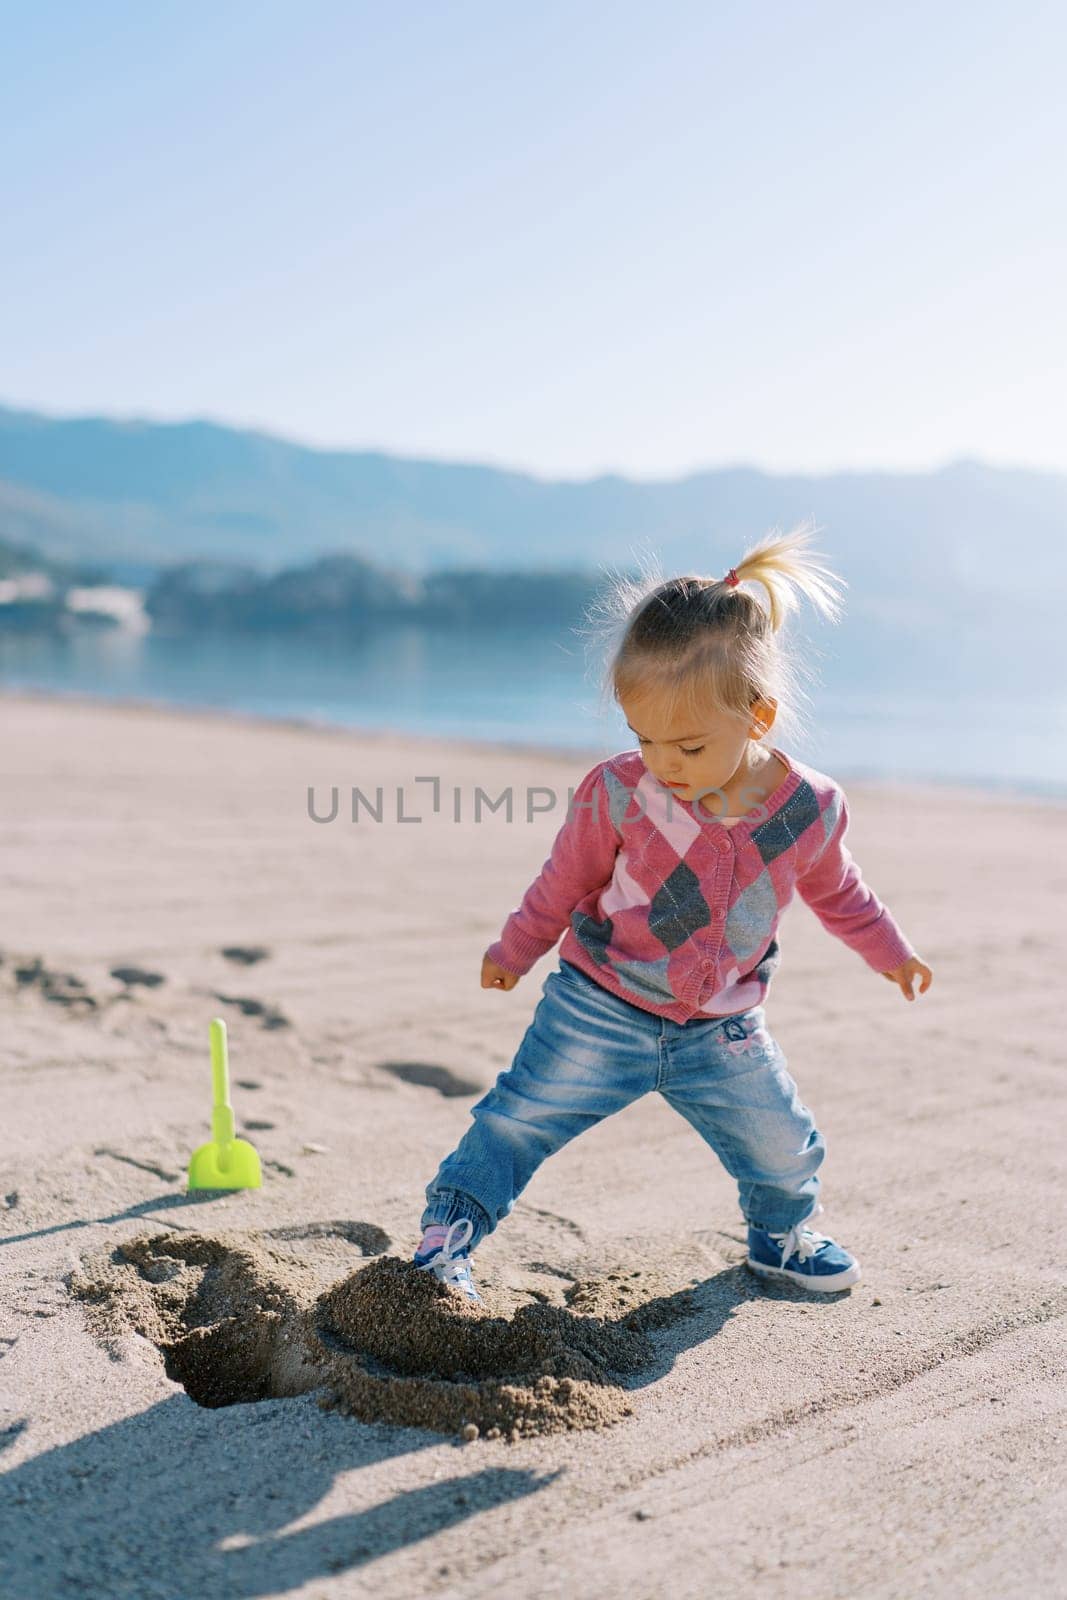 Little girl fills a hole in the sand with her foot near a toy shovel by Nadtochiy